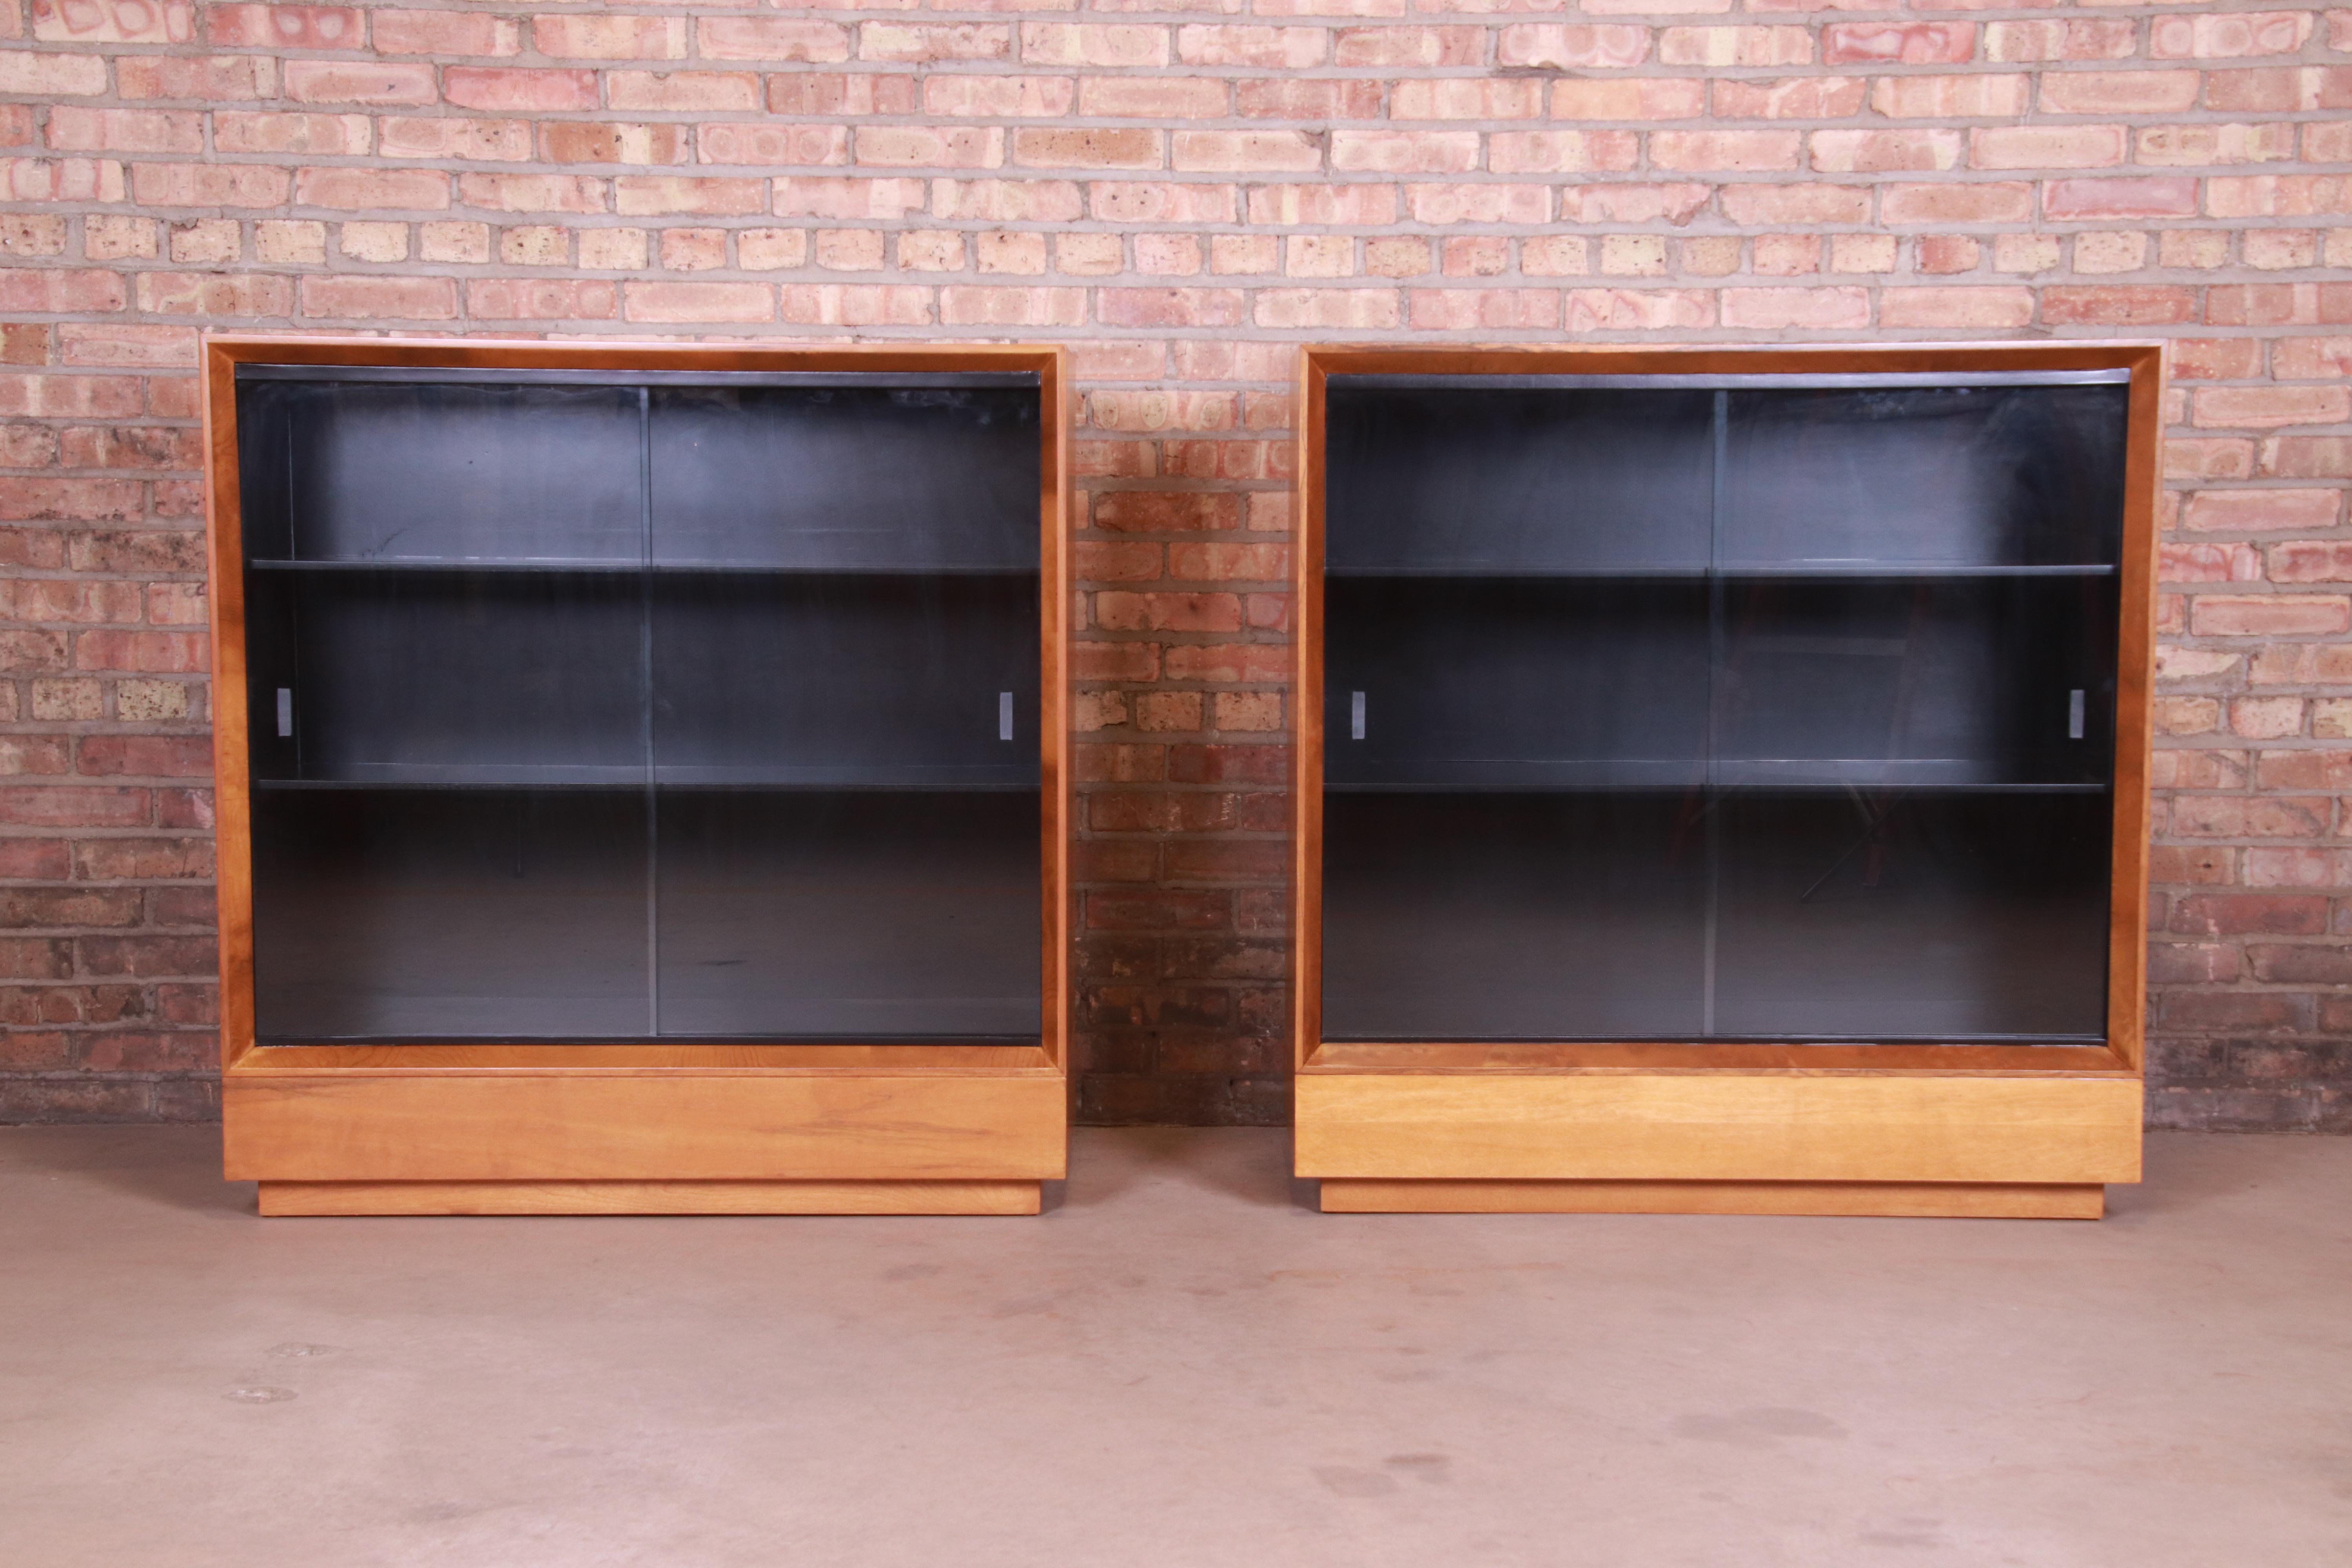 An extremely rare and exceptional pair of Mid-Century Modern bookcase cabinets

Designed by Gilbert Rohde for Herman Miller 